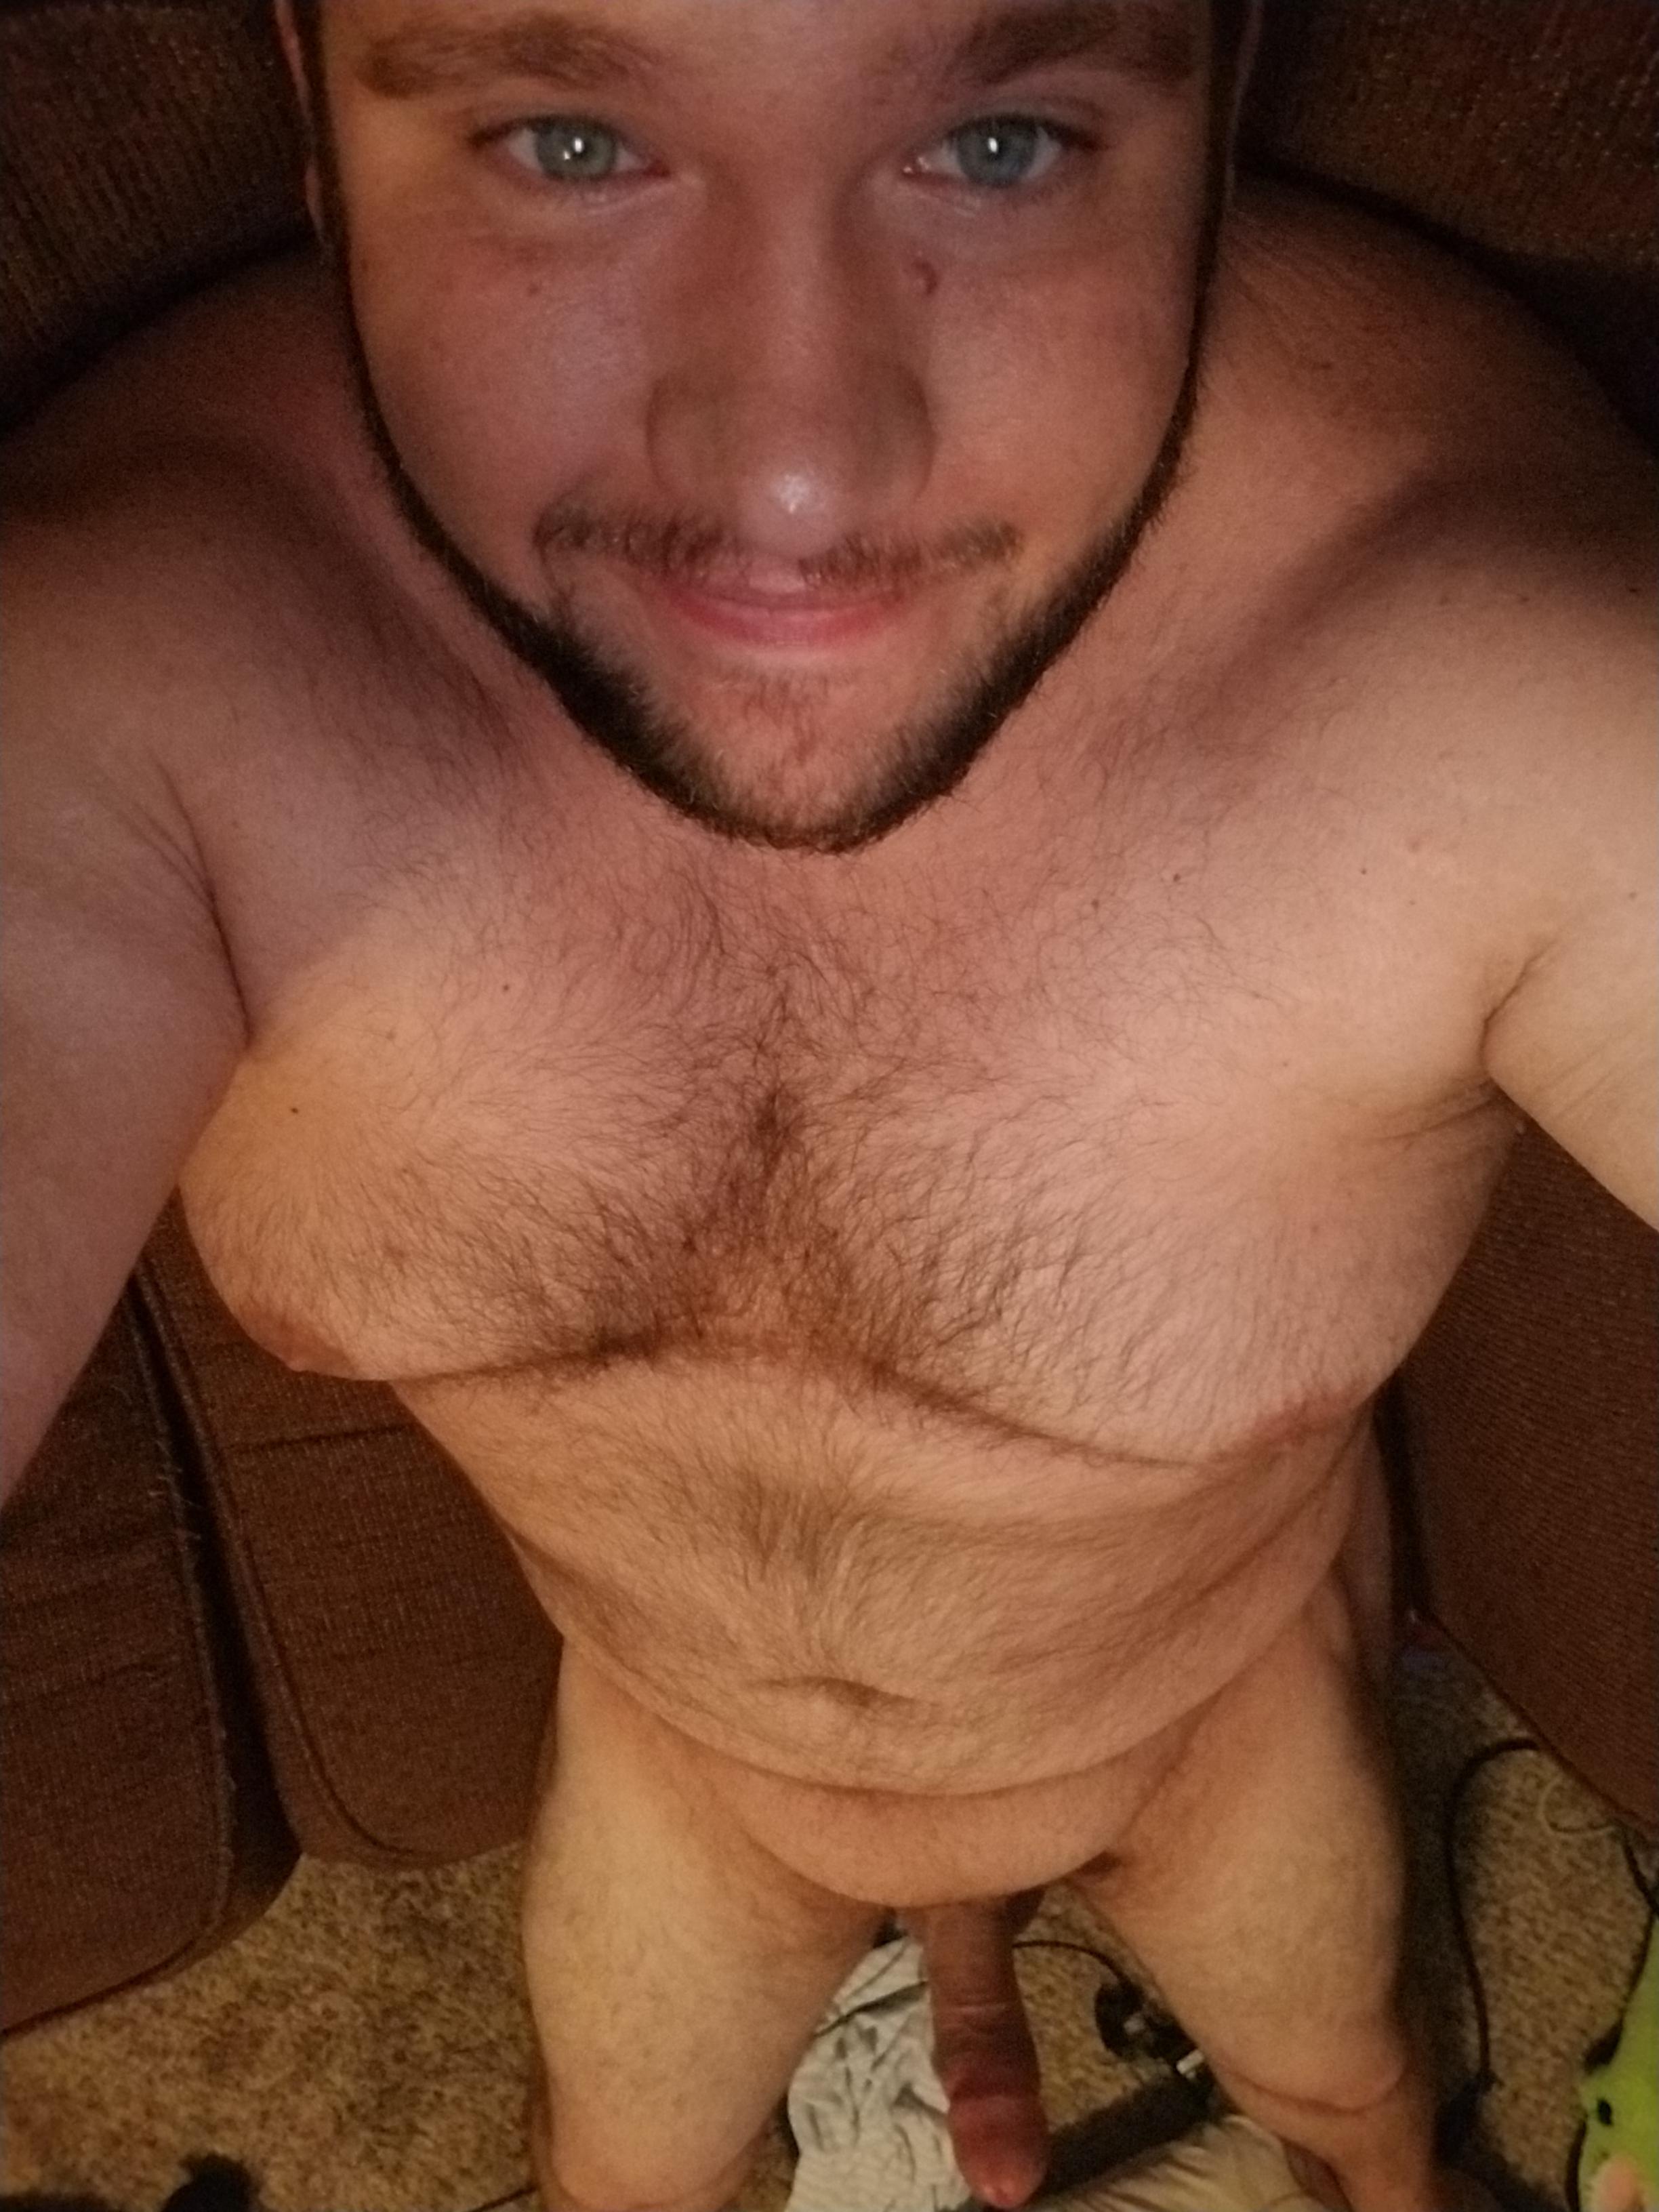 33M First time posting. I put on weight while married, but going through a separation. I want to feel comfortable about my body, tell me what you think.